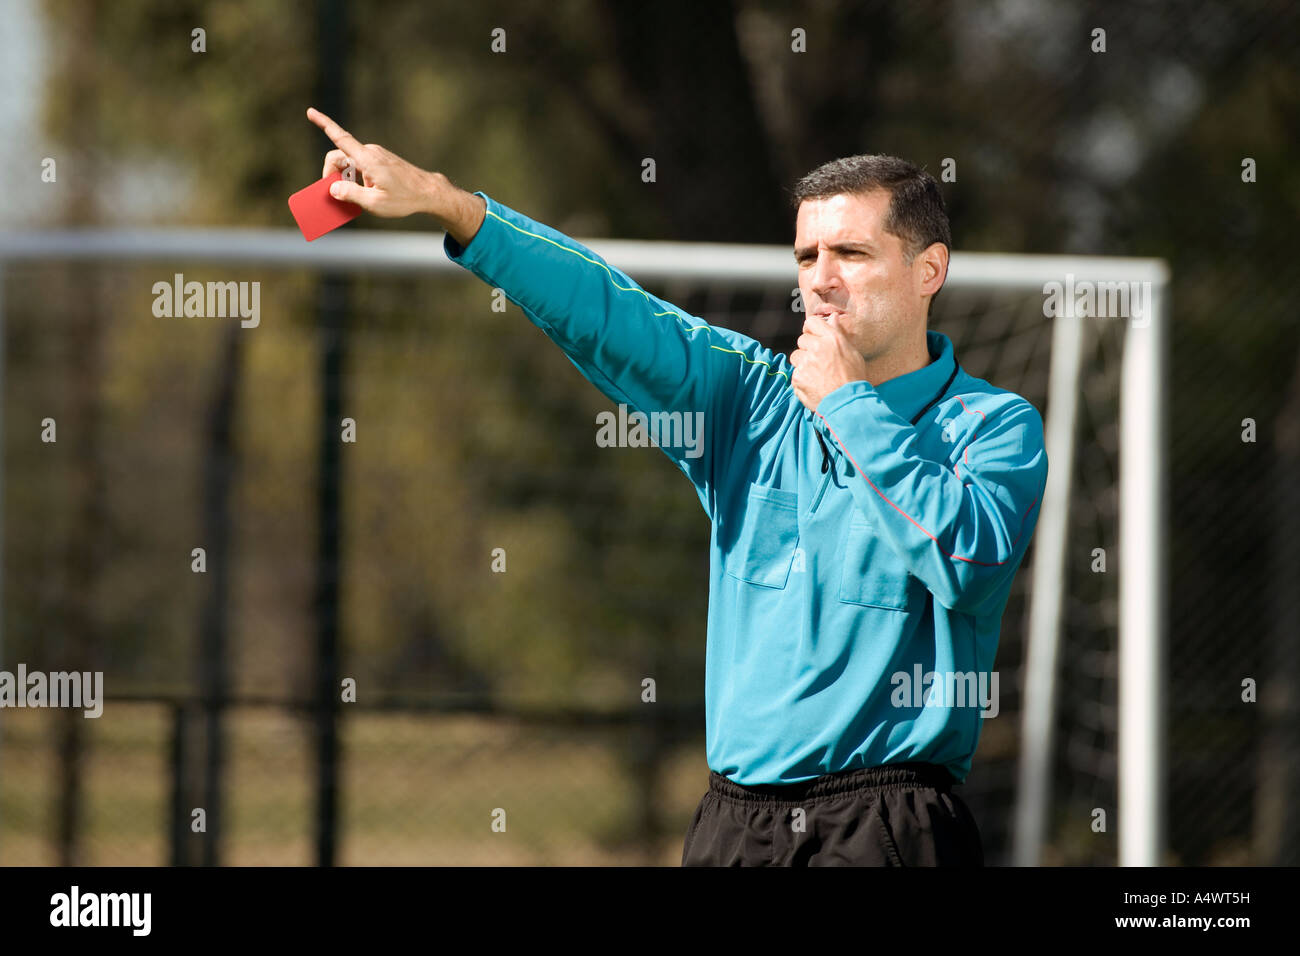 referee showing a soccer player the red card Stock Photo